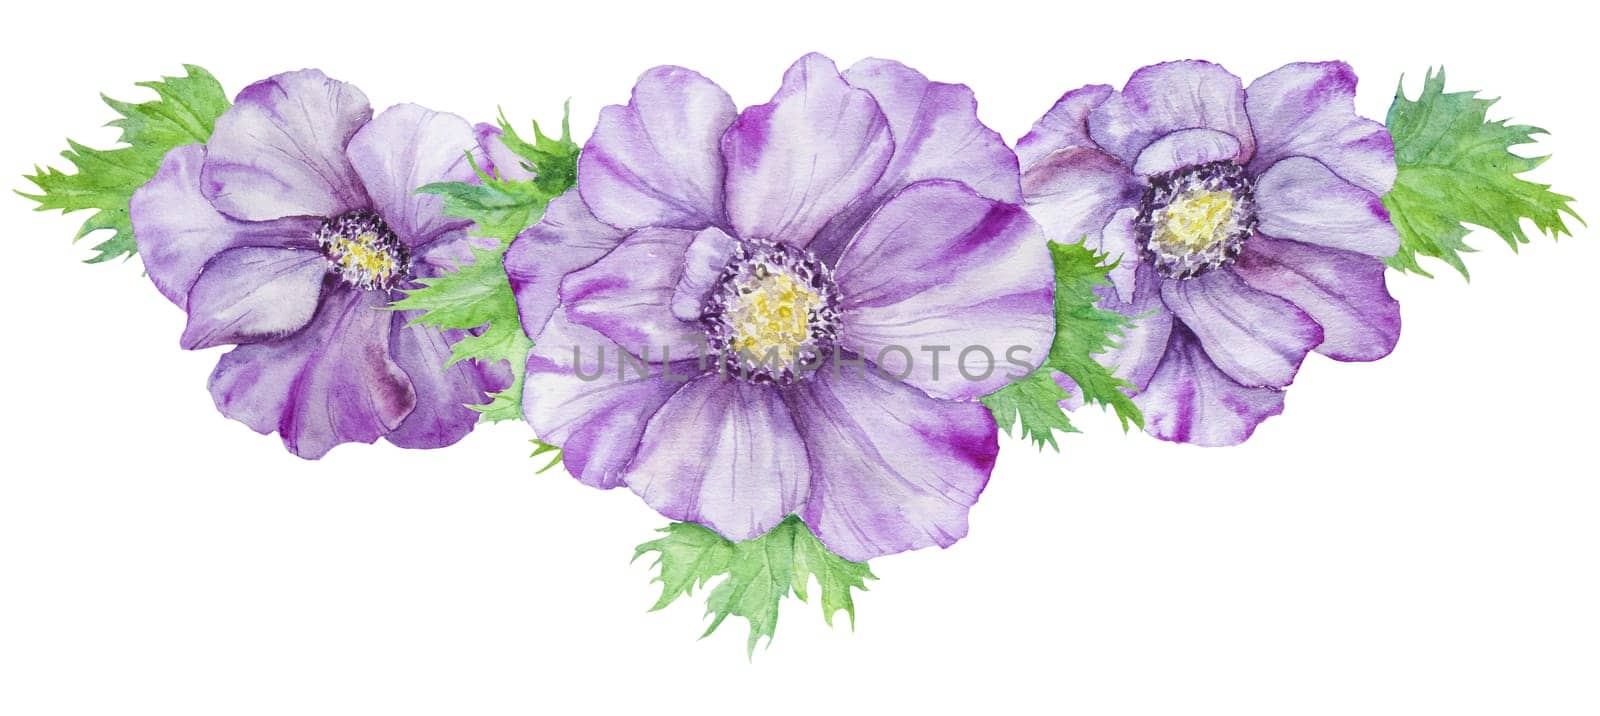 Hand drawn watercolor set of purple anemones with green leaves. Spring compositioin for wedding invitations, greeting cards by florainlove_art